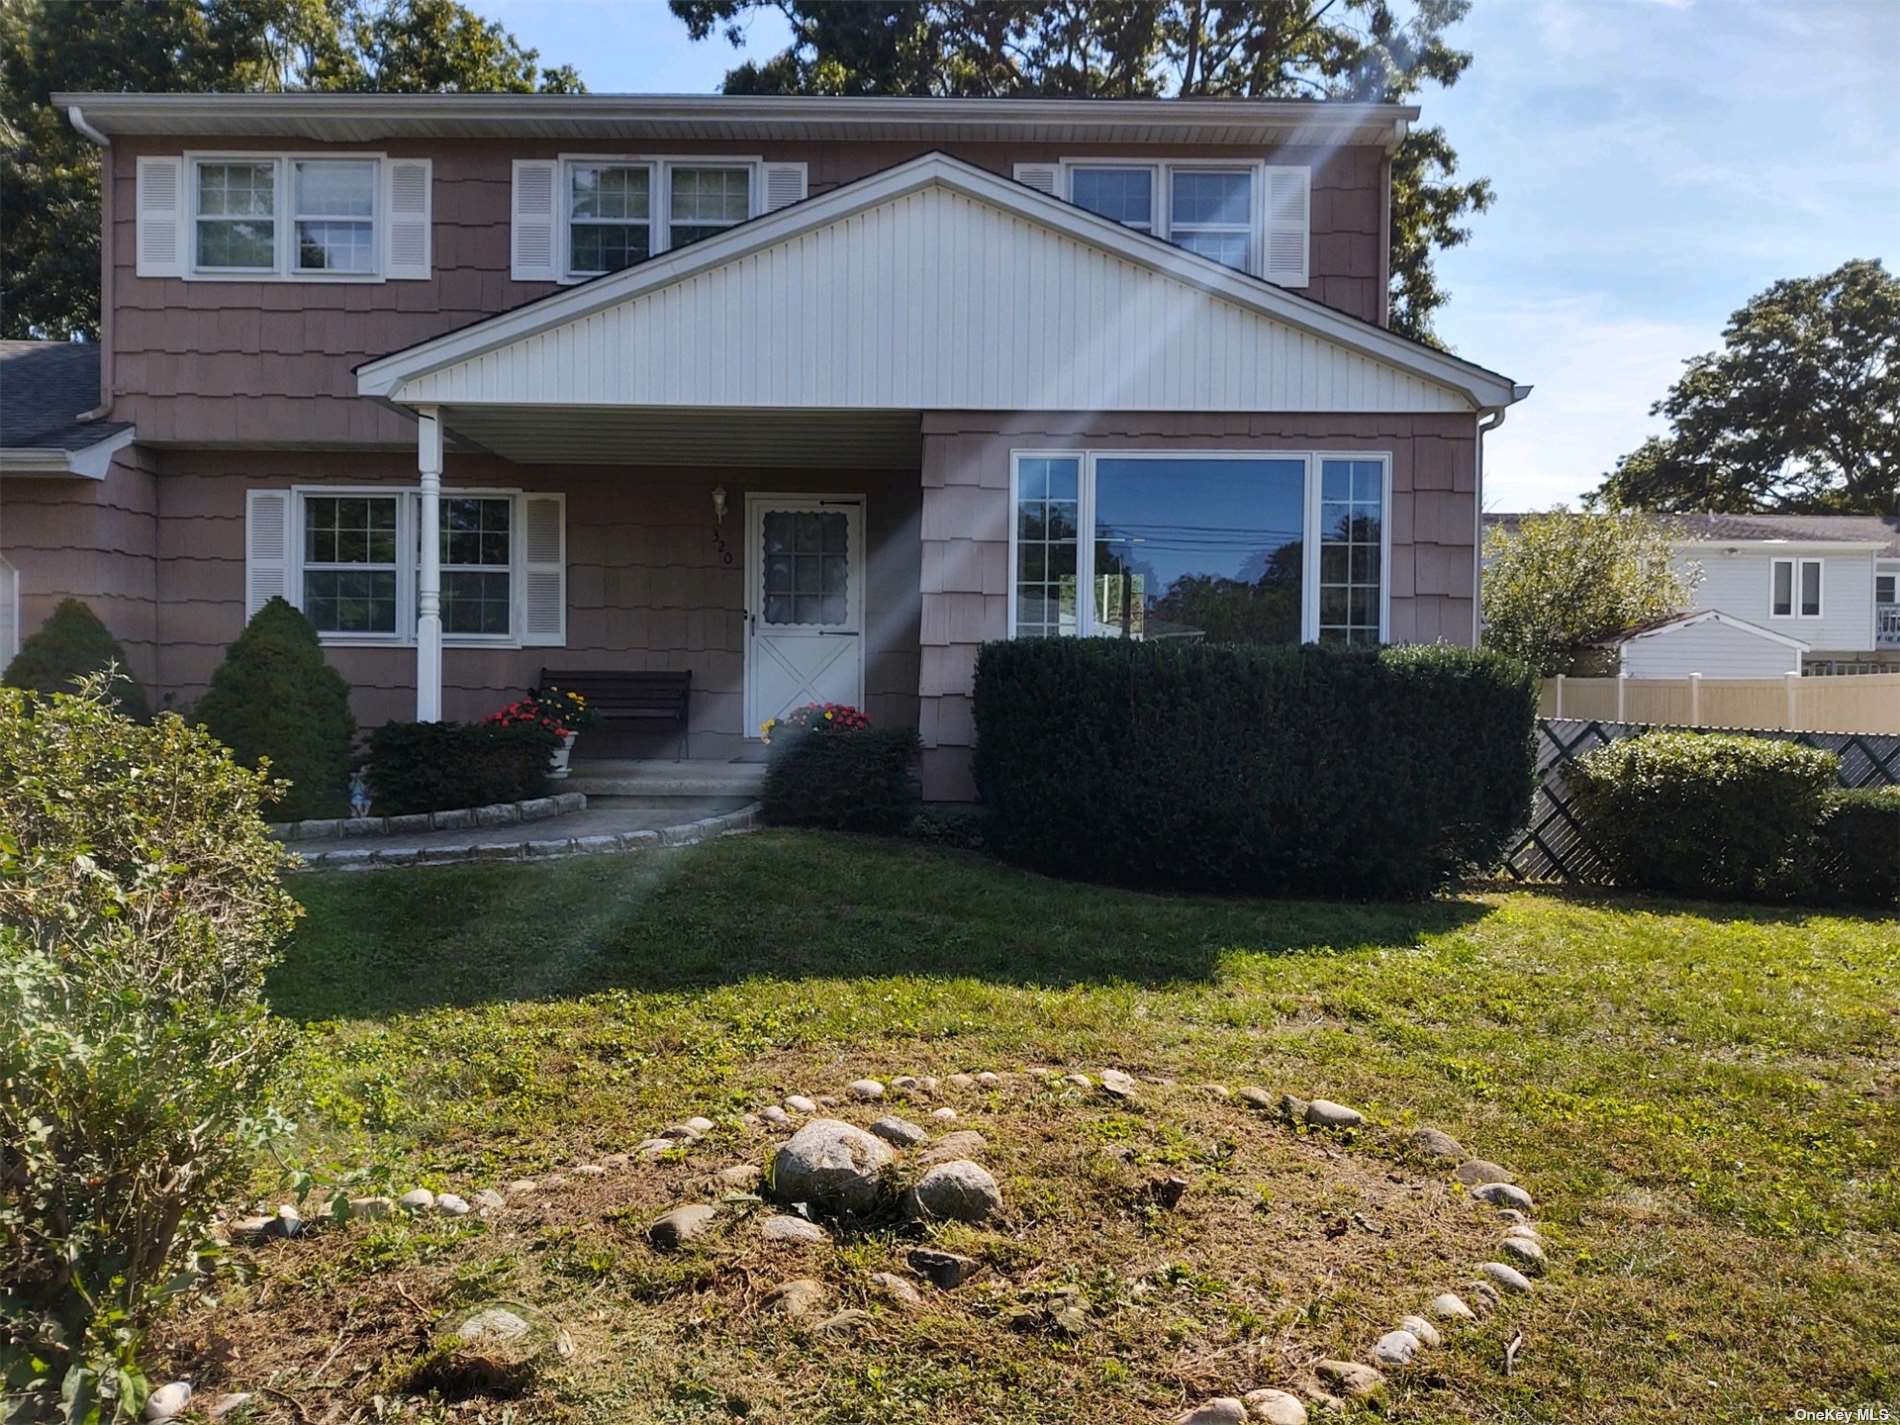 Listing in Dix Hills, NY